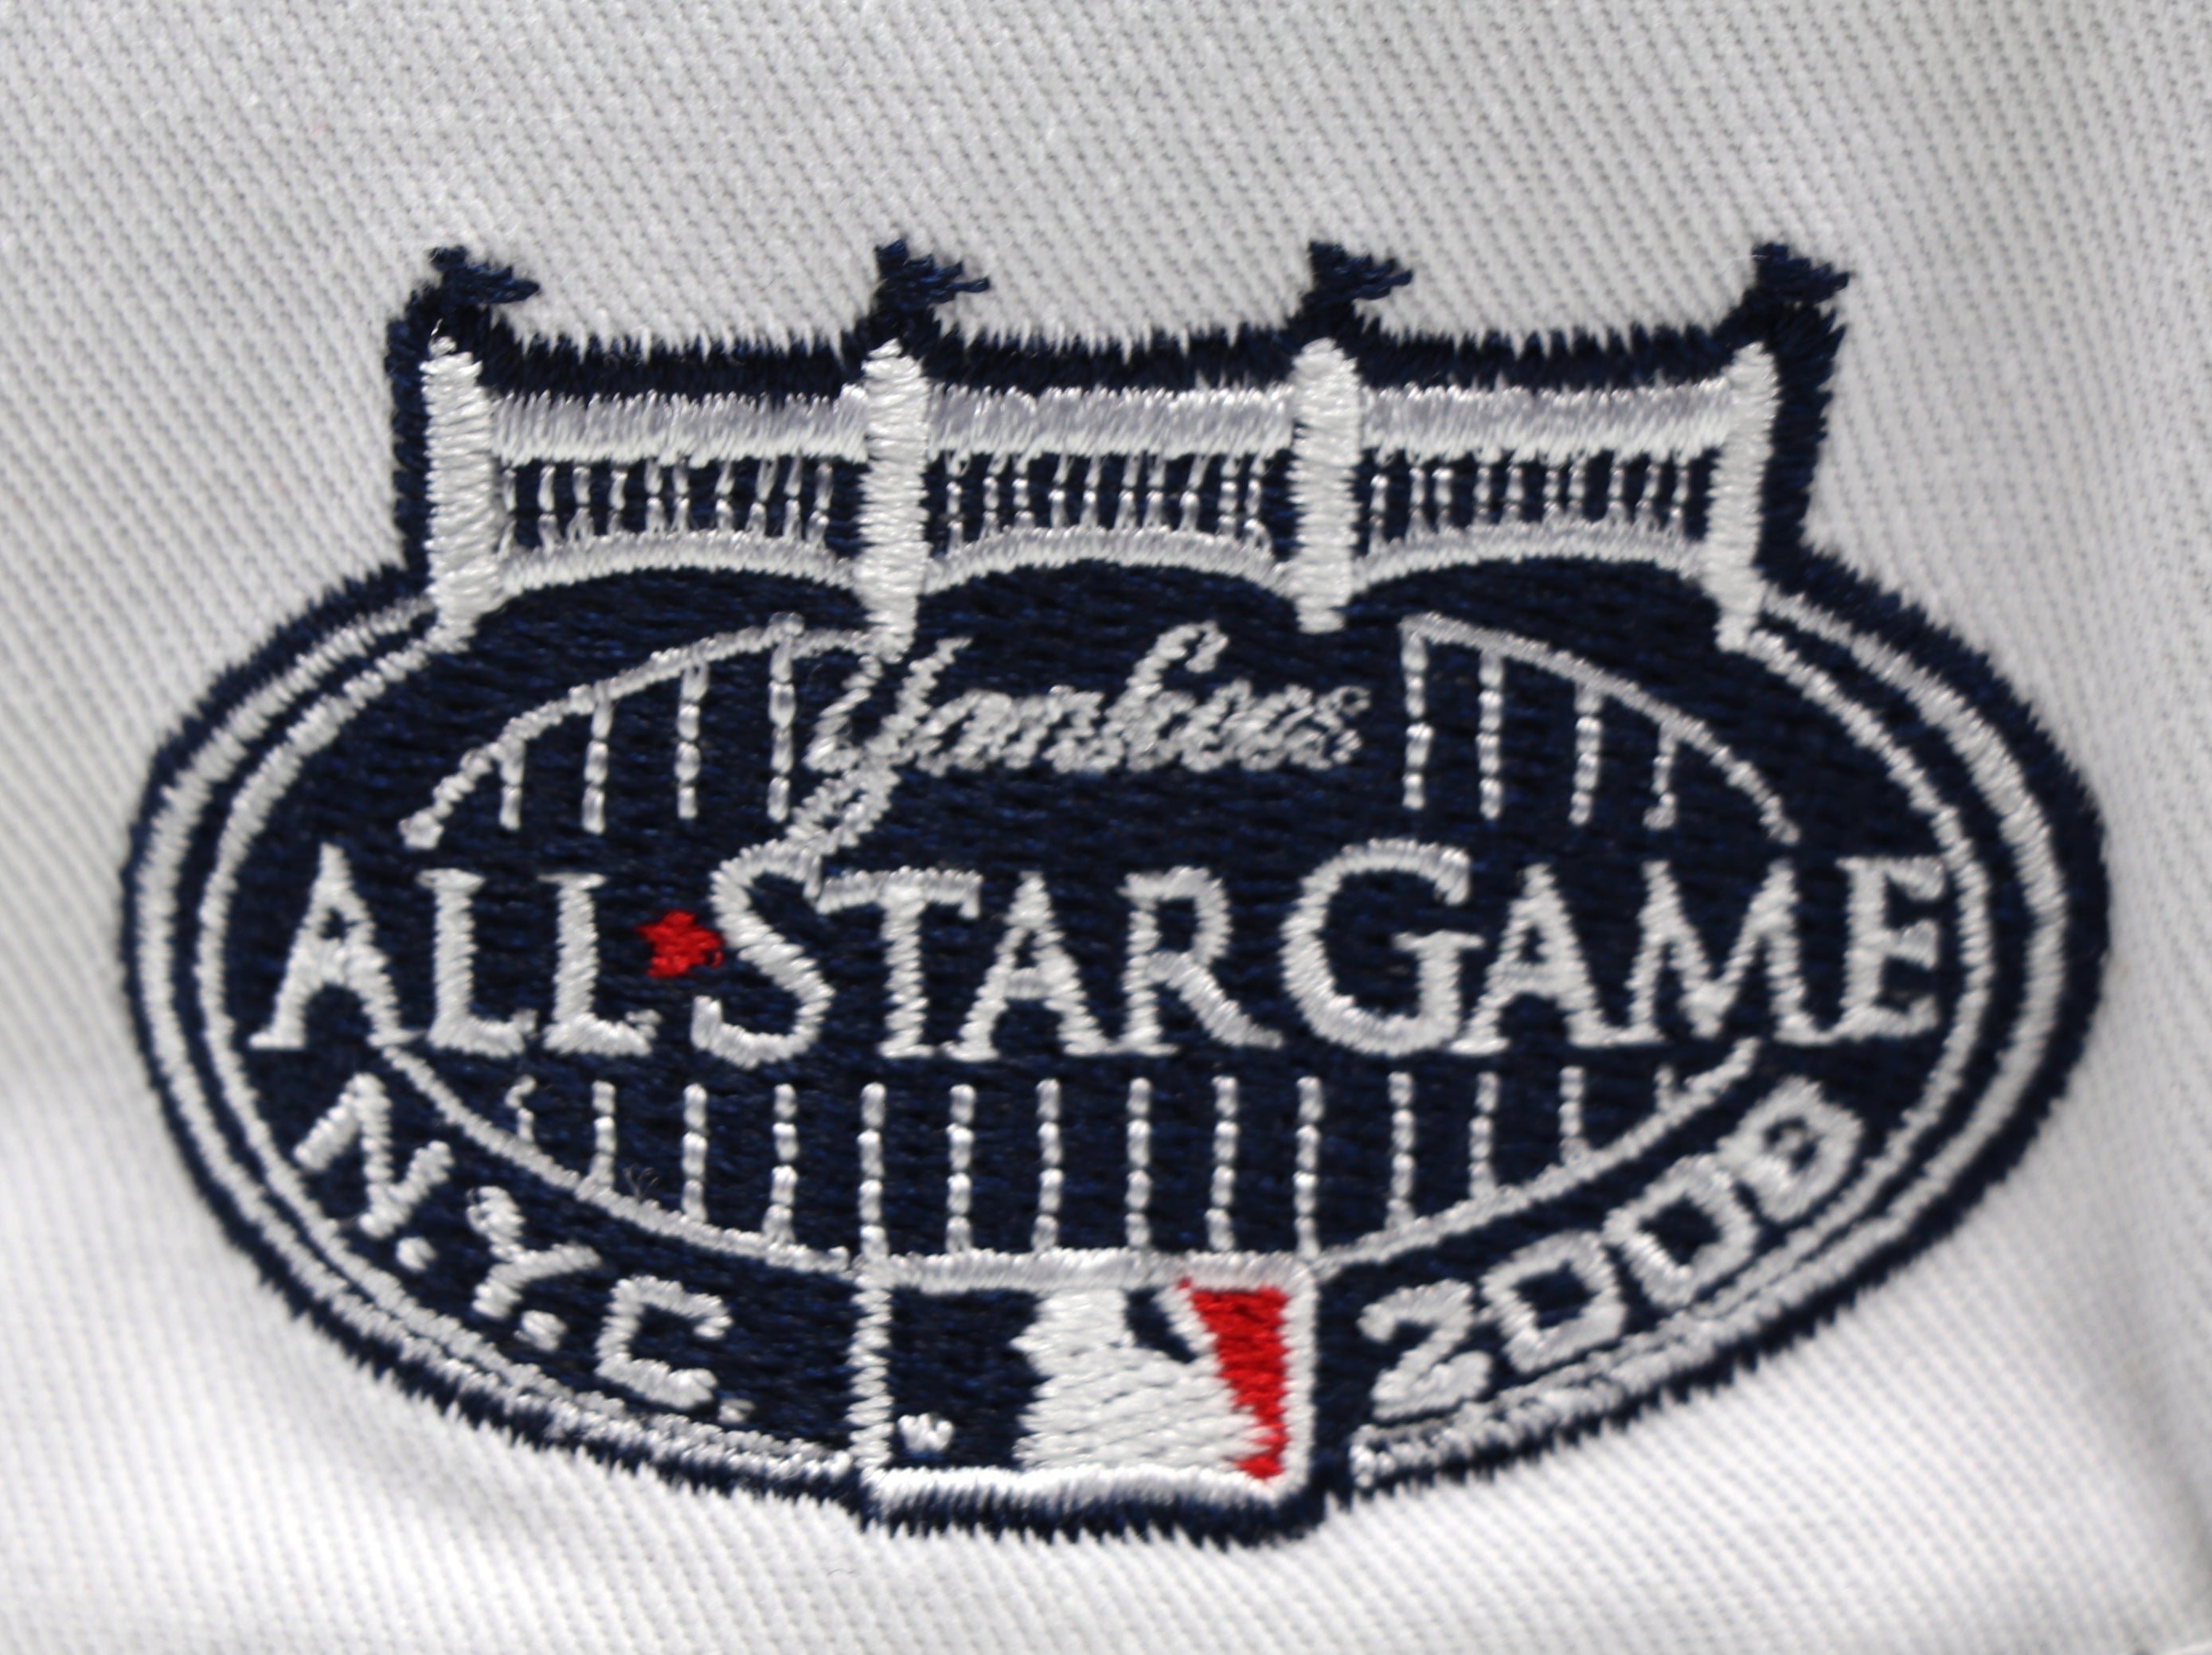 NEW YORK YANKEES (WHITE) "2008 ASG TOP HAT LOGO" NEW ERA 59FIFTY FITTED ( GREY UNDER VISOR)